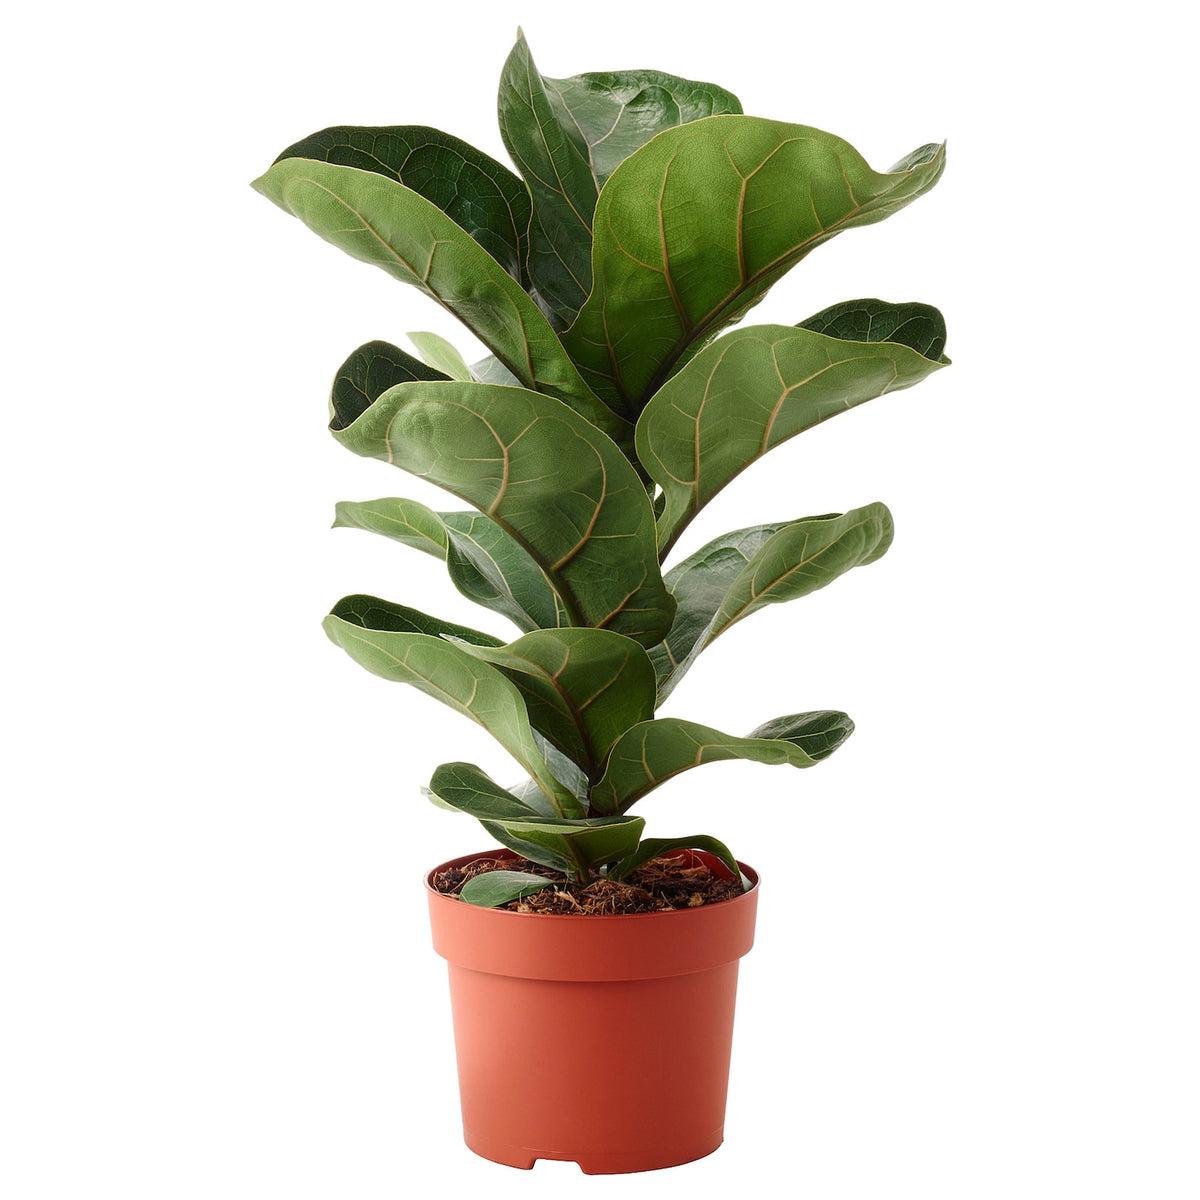 A plant with upward-growing, large green leaves. They have an almost paper-like texture, but are not delicate looking at the same time. Leaves are largest at the top of the plant. It is growing in an orange planter.